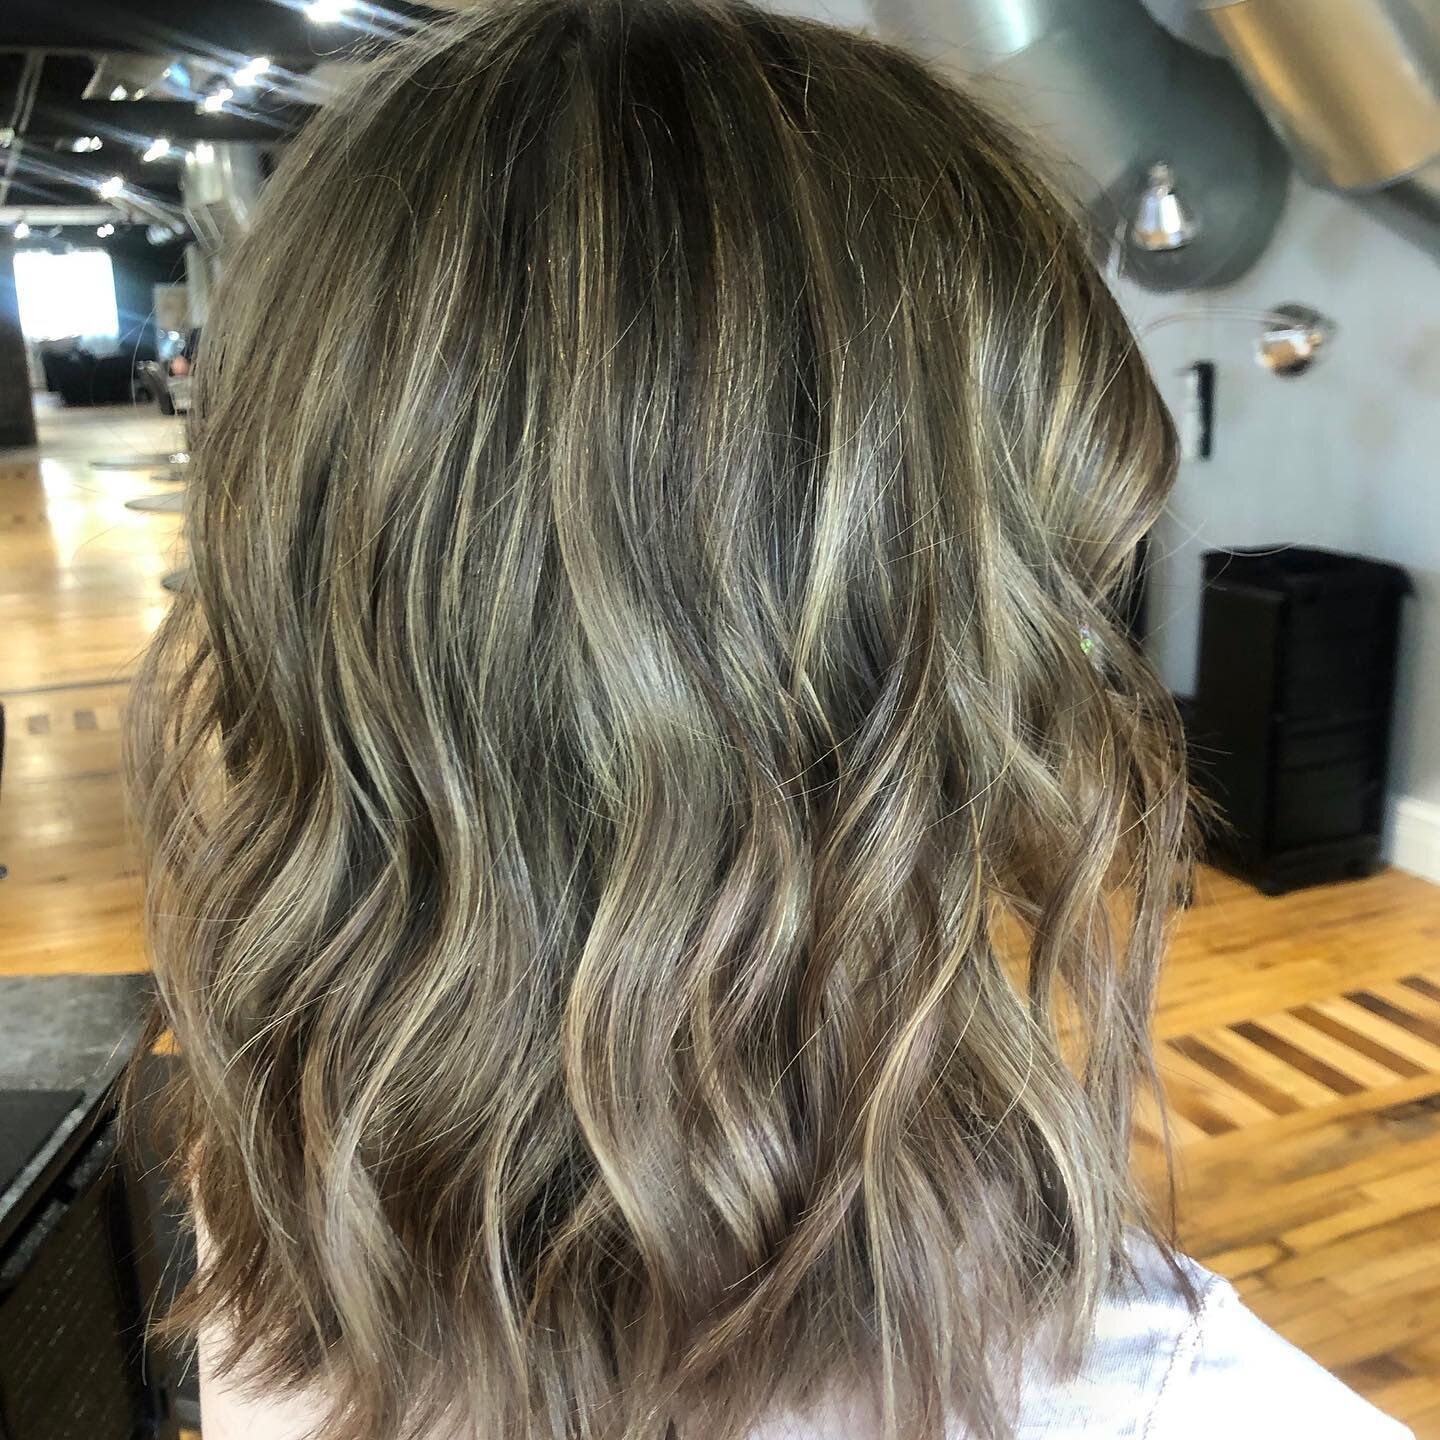 Check out this transformation!! She wanted to start transitioning into a blonde from being a brunette. This was our first attempt at a heavy foil to get her blonde and protecting her integrity. We will do another session in the future but I was reall